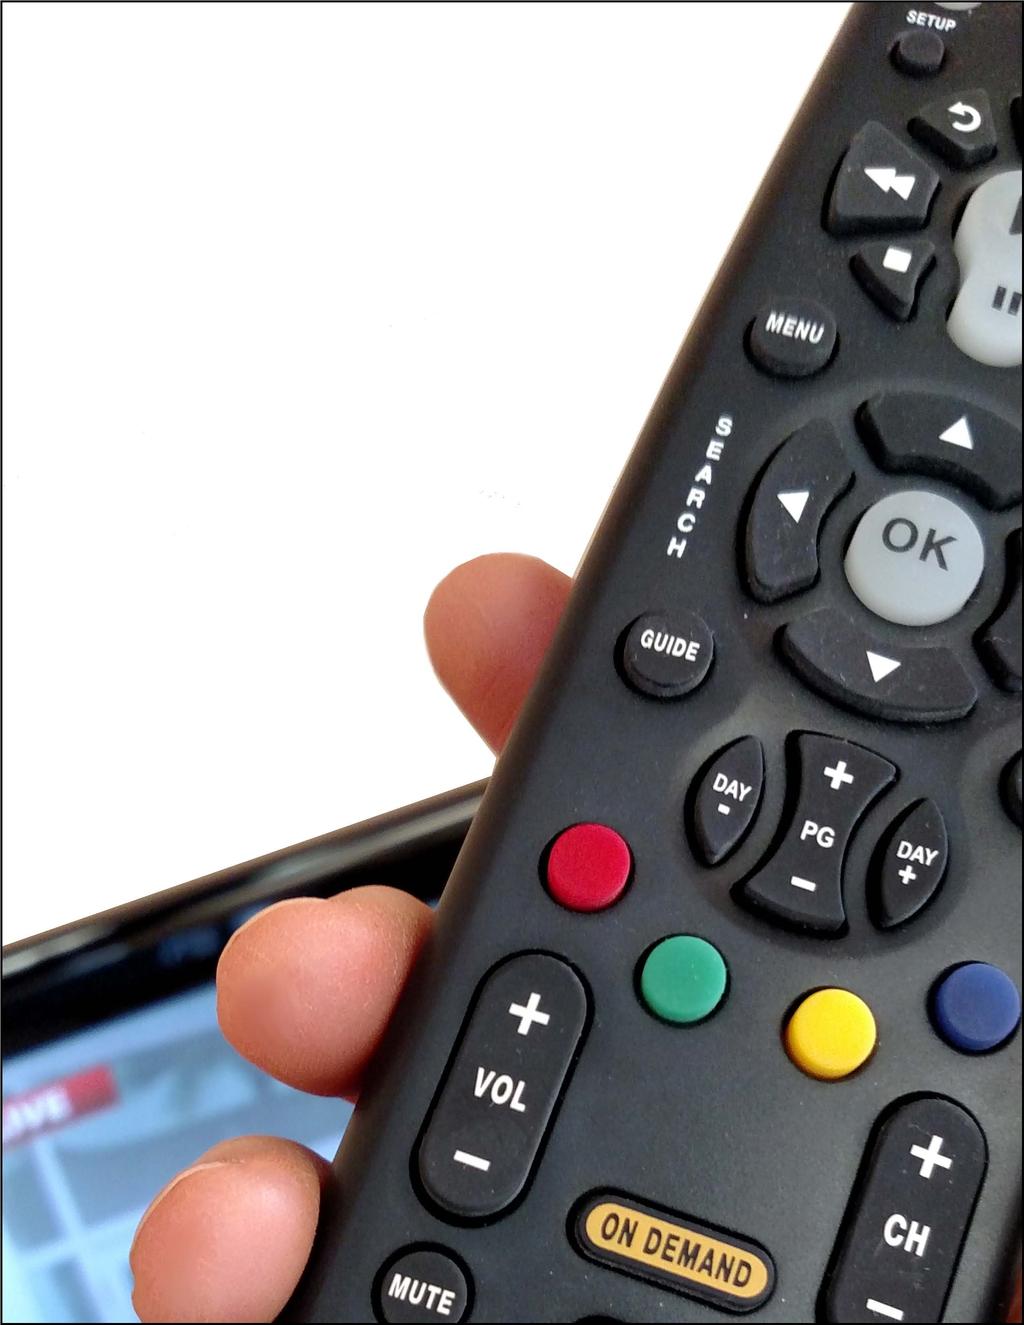 DIGITAL TV Standard Remote Control Programing Guide with Troubleshooting